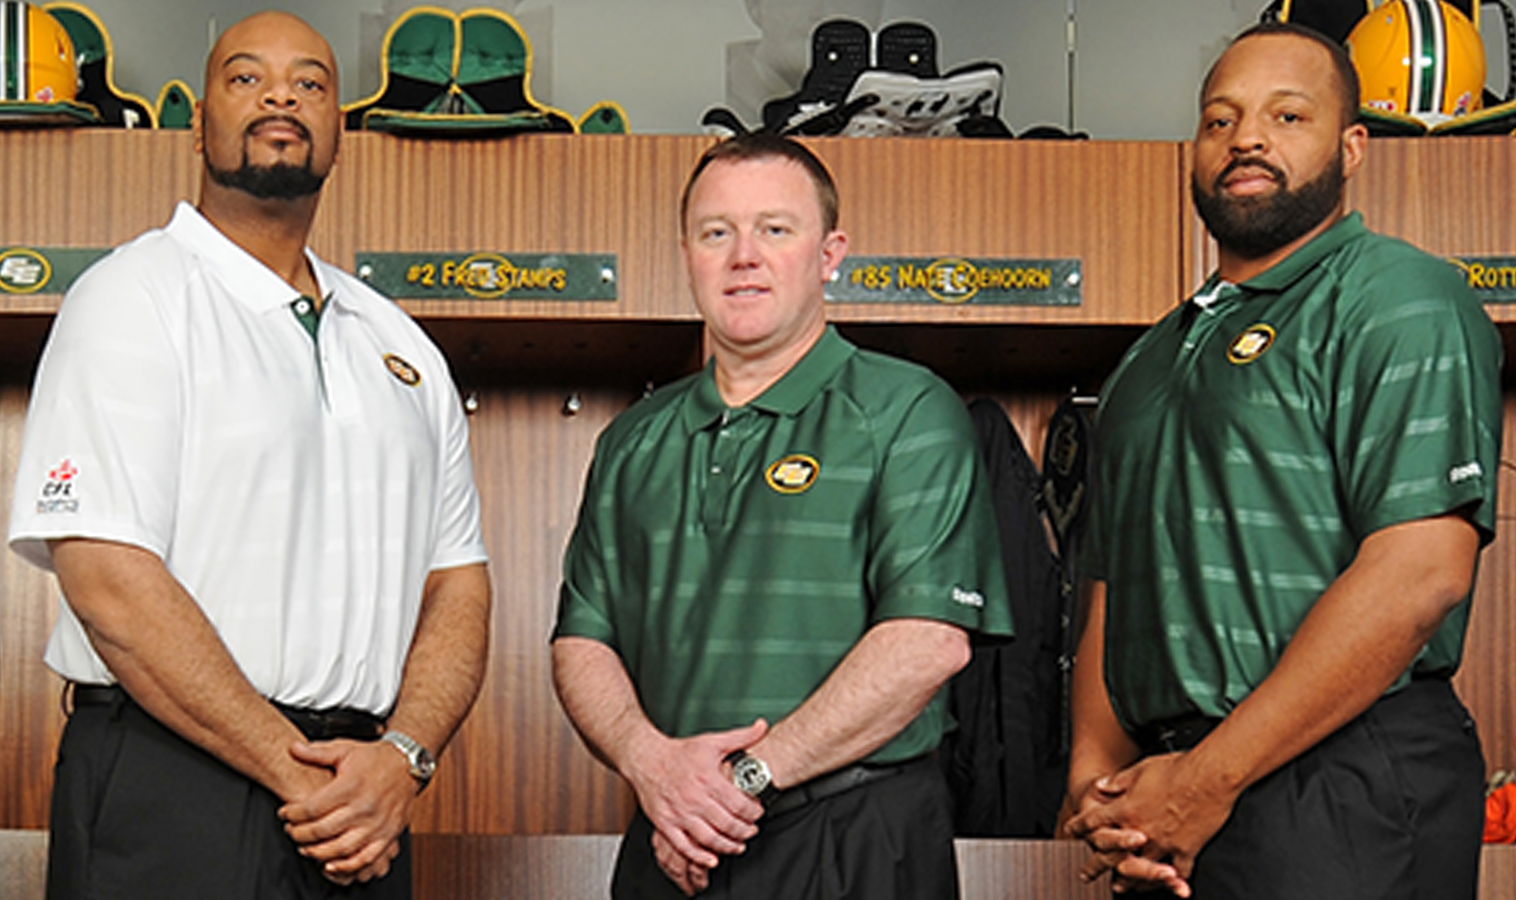 Chris Jones (centre) introduces Stephen McAdoo (left) and Jarious Jackson (right) as part of his first Edmonton coaching staff back in January 2014.